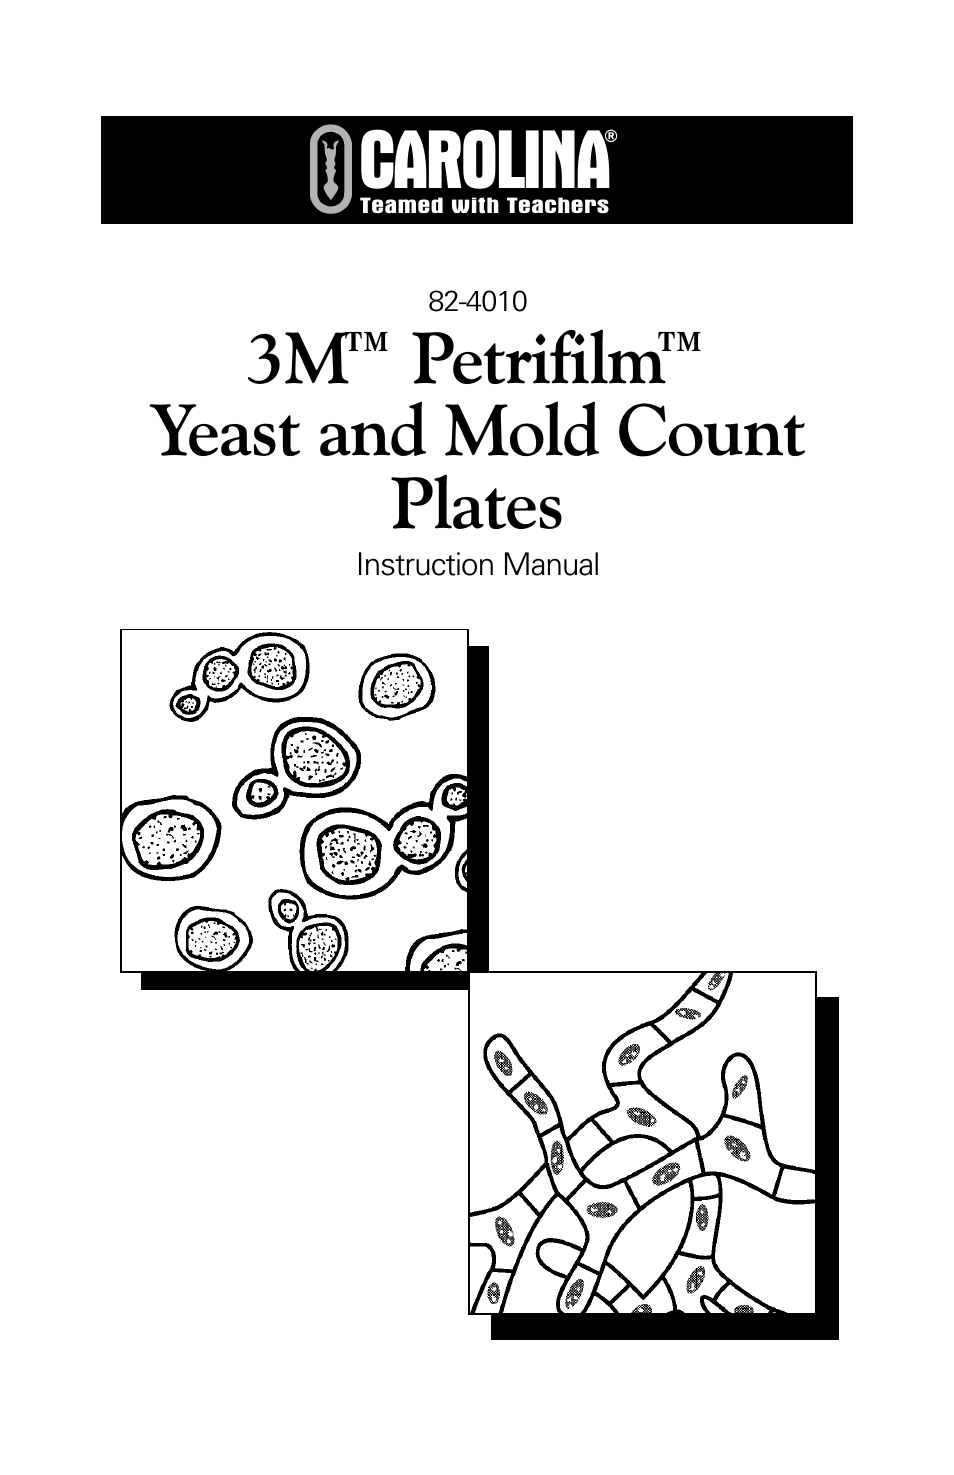 3M Petrifilm Yeast & Molds Count Plates